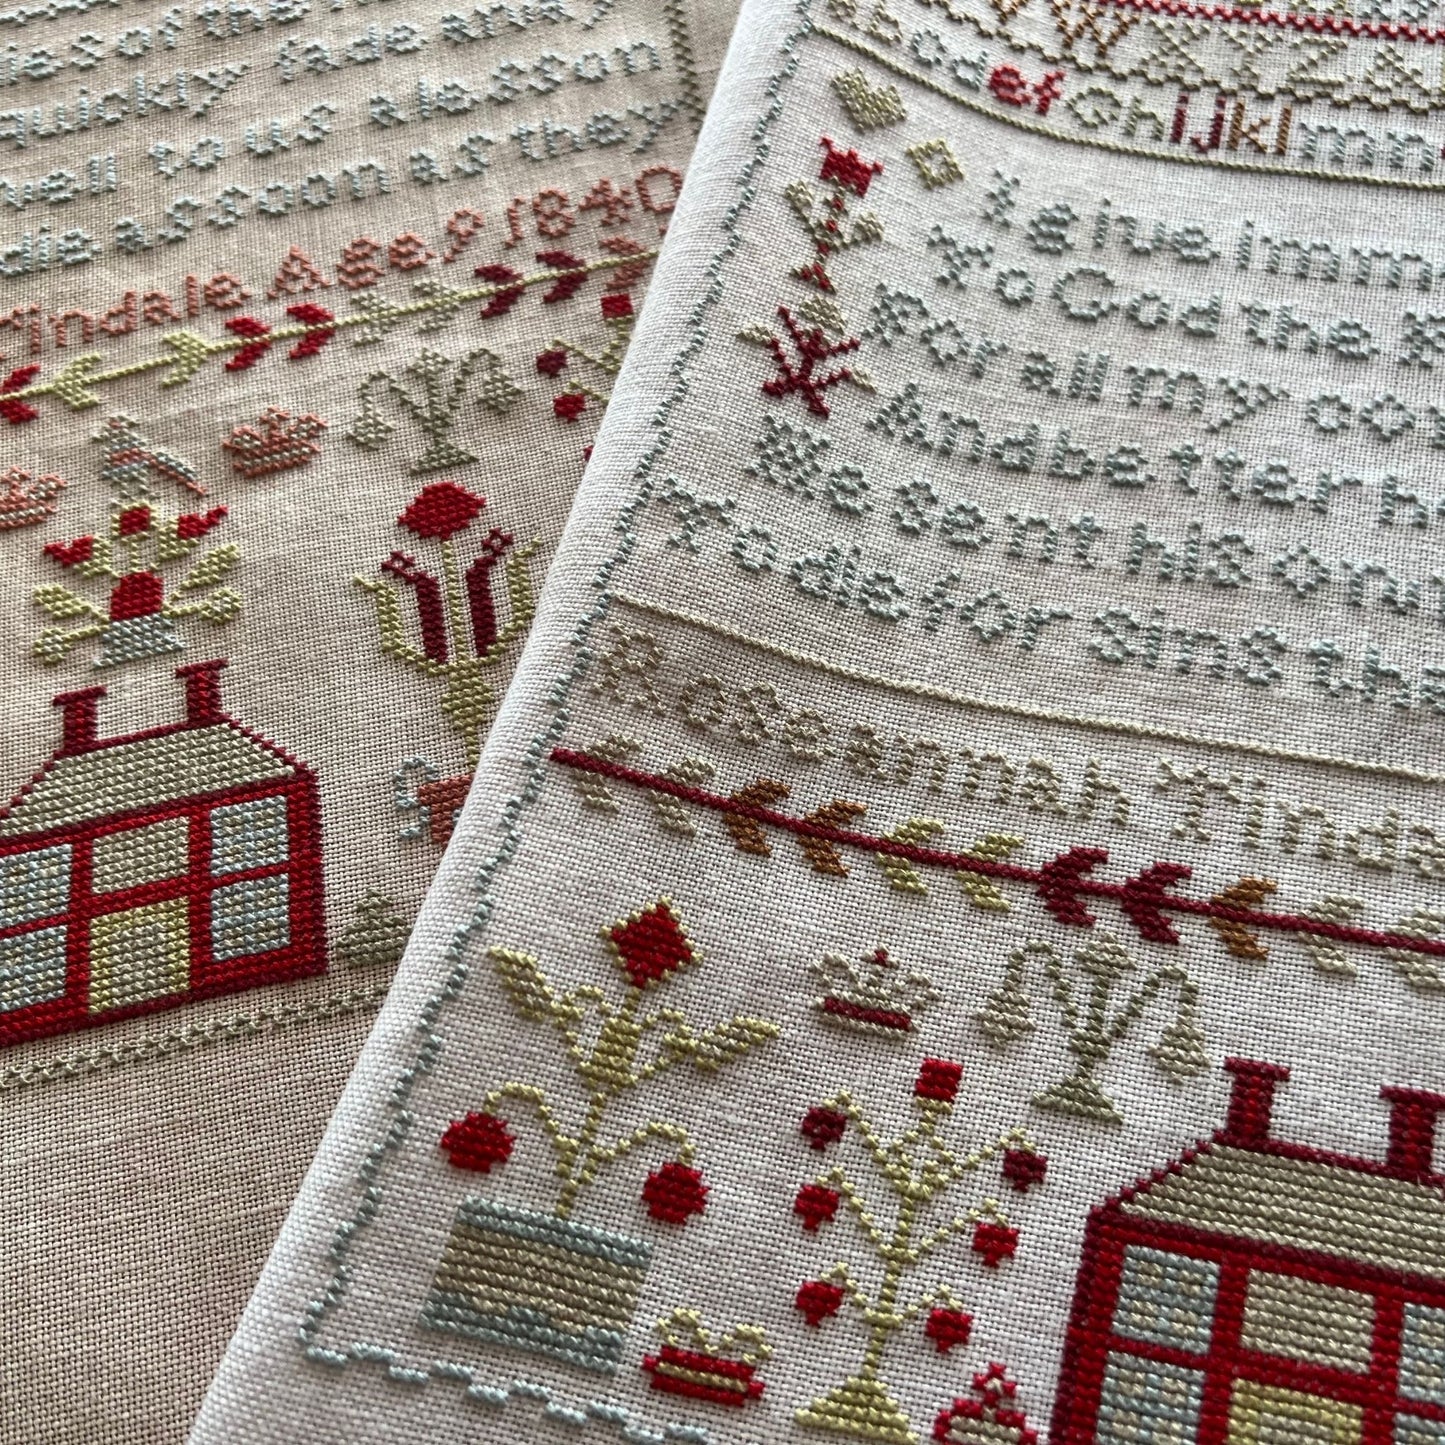 Tindale Sisters 1840 Two Samplers Together